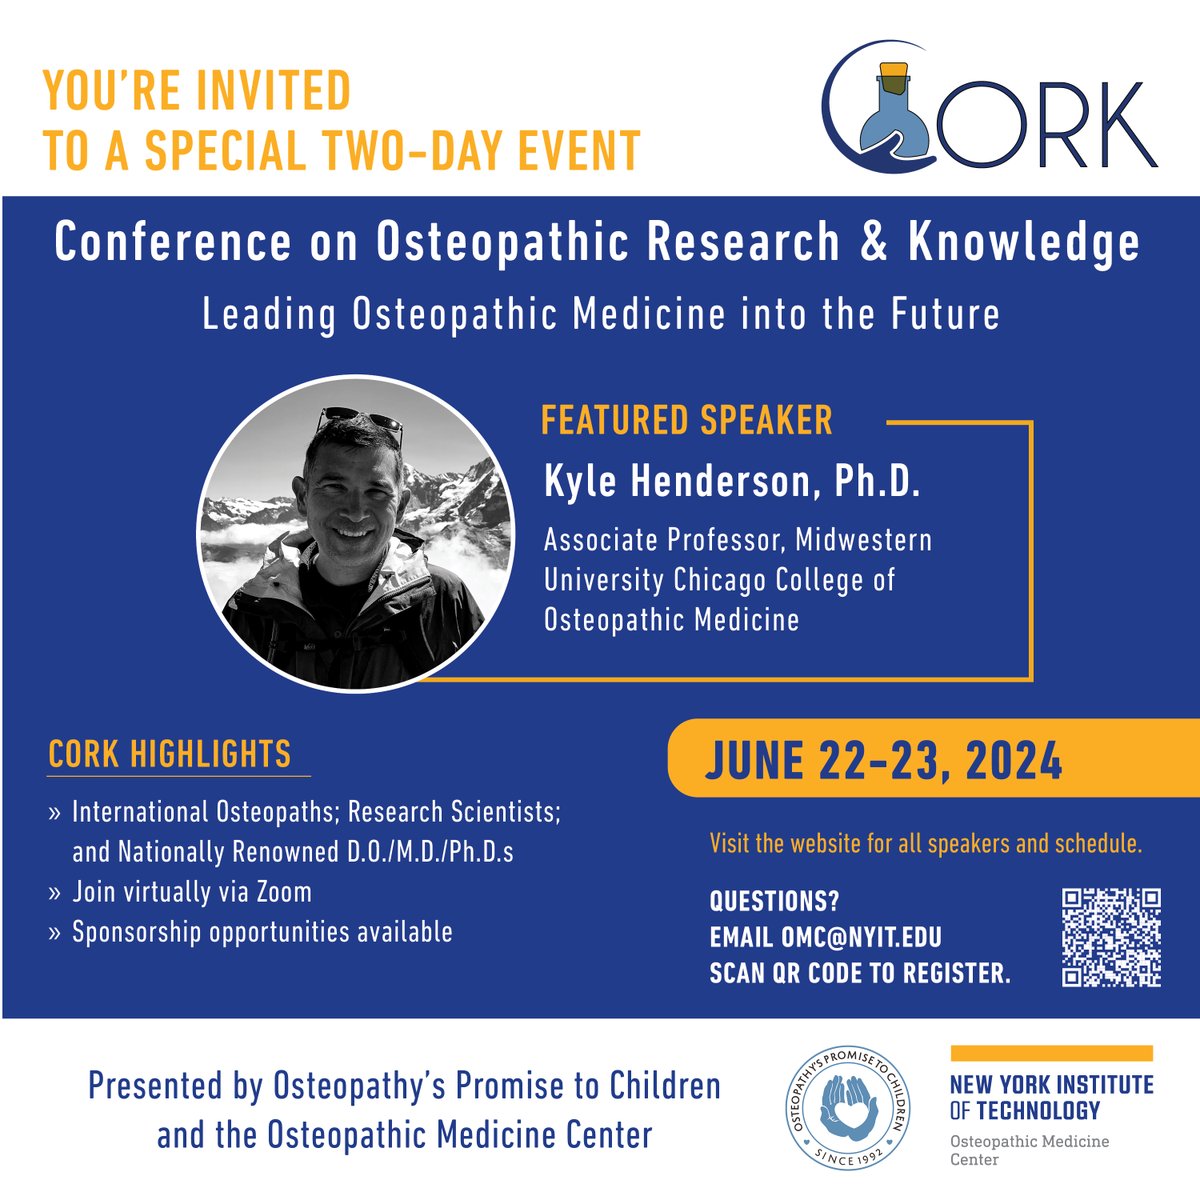 🌐 Explore #CORK2024: Two-Day Symposium on Osteopathic Research & Knowledge! 📆 June 22-23, 2024 📍 NYIT College of Osteopathic Medicine 🌐 RSVP: nyit.edu/u/tZE9Q0 🎙️ Featured Speaker: Dr. Kyle Henderson, Ph.D., joined by experts. @AOAforDOs @CORK2024